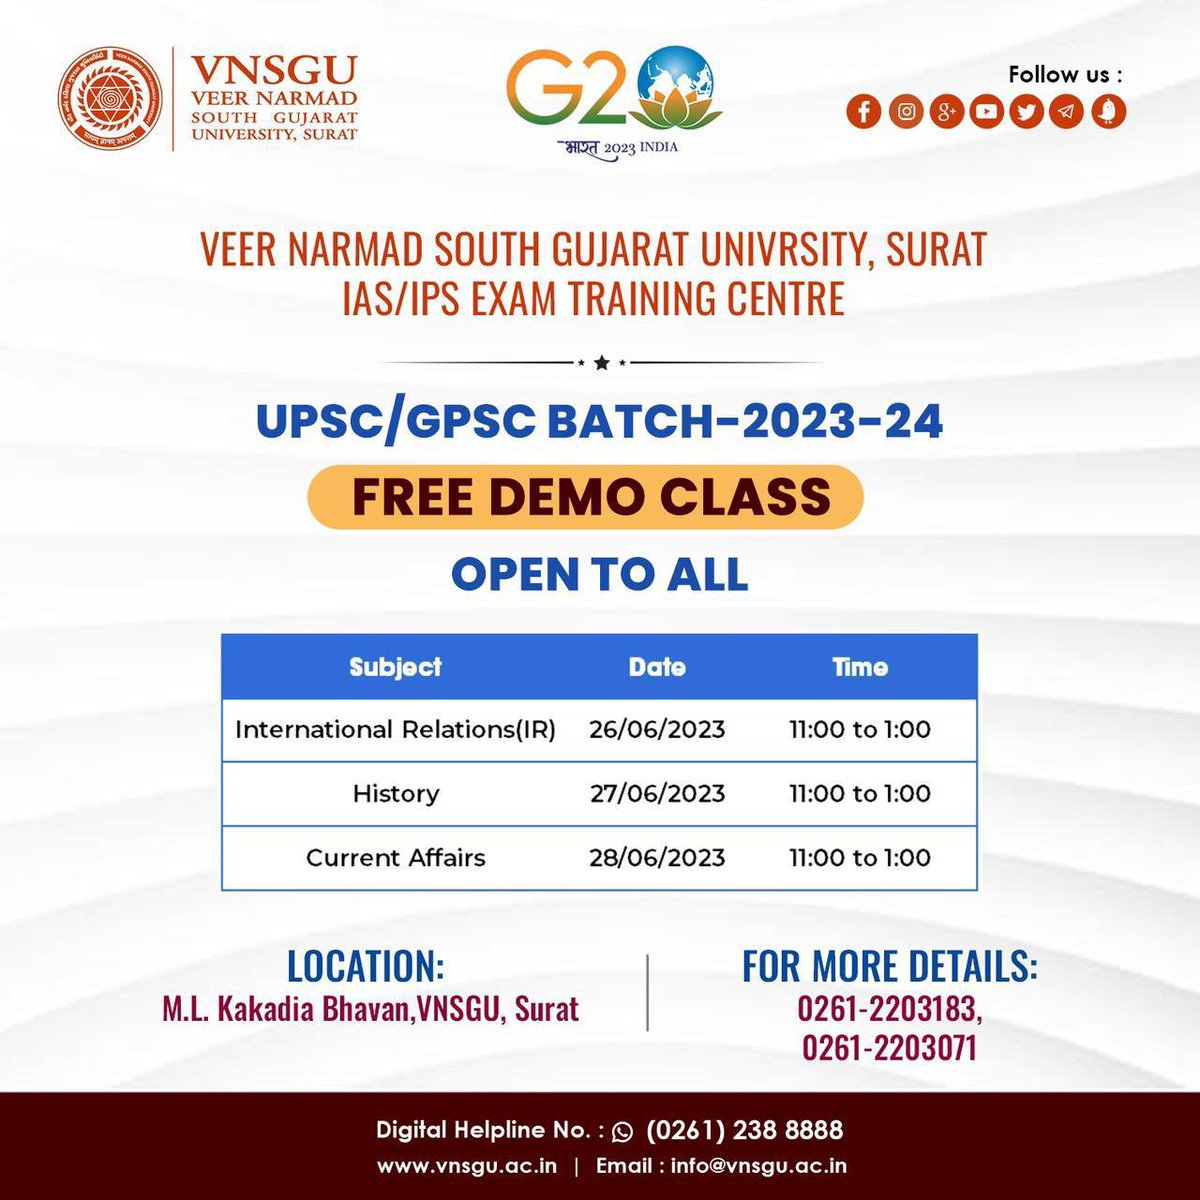 Are you the one getting ready for the IAS/IPS exam? In order to train you, Veer Narmad South Gujarat University is here:- FREE DEMO CLASS FOR UPSC/GPSC BATCH 2023–24!
The topics, dates, and times are listed above.
Location:-M.L.Kakadia Bhavan,Vnsgu,Surat.